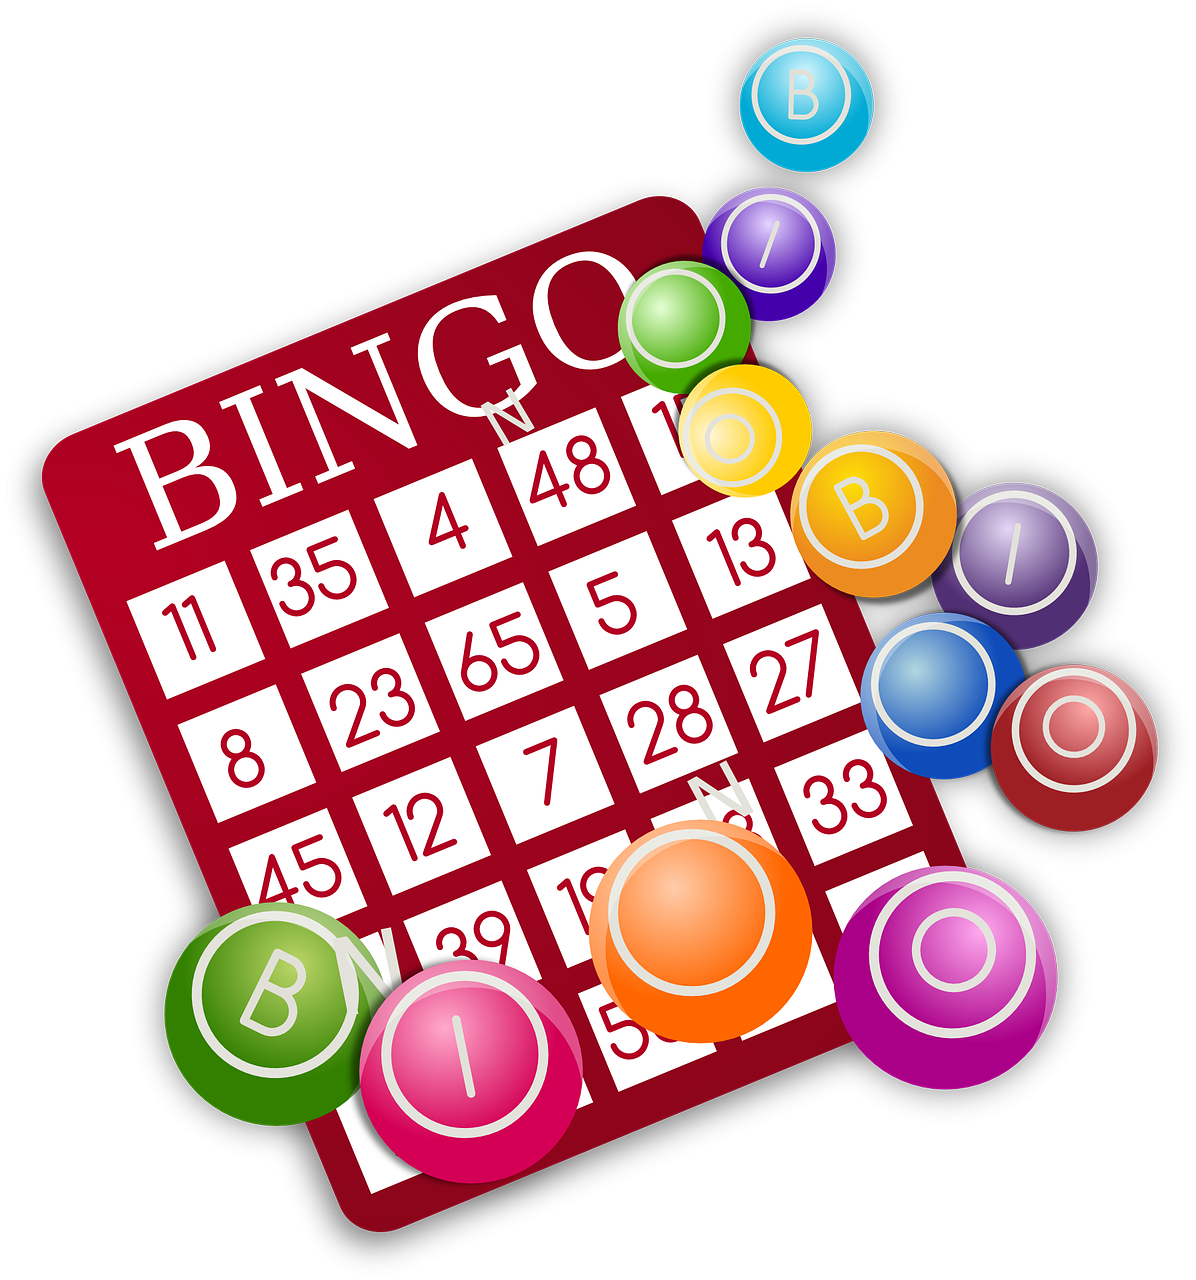 Colorful illustration of bingo card with BINGO counters scattered on card. 